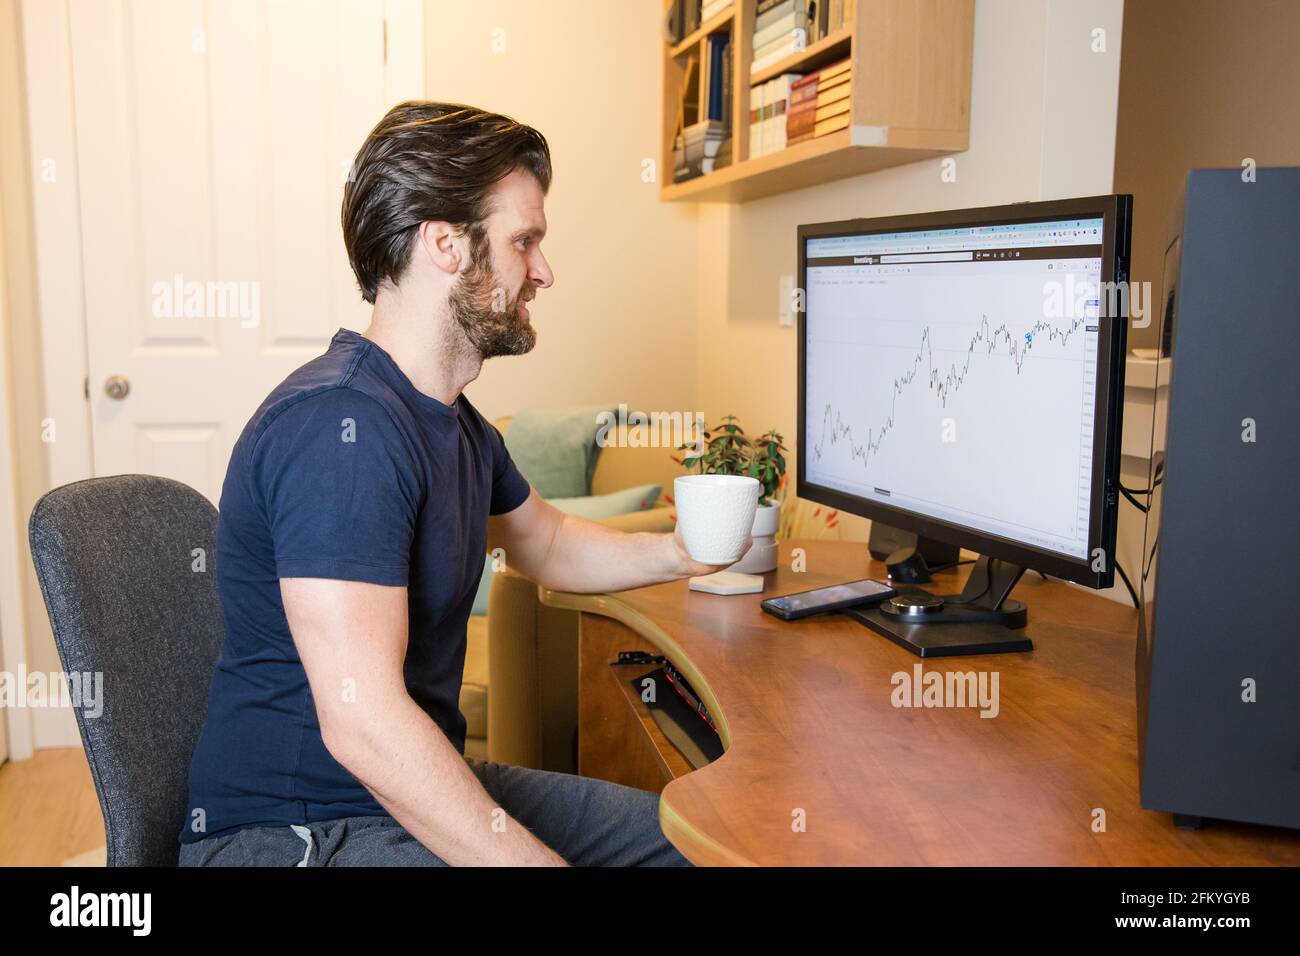 Man looking at finance chart on computer, day trader, investing from home, sipping coffee, relaxed man Stock Photo